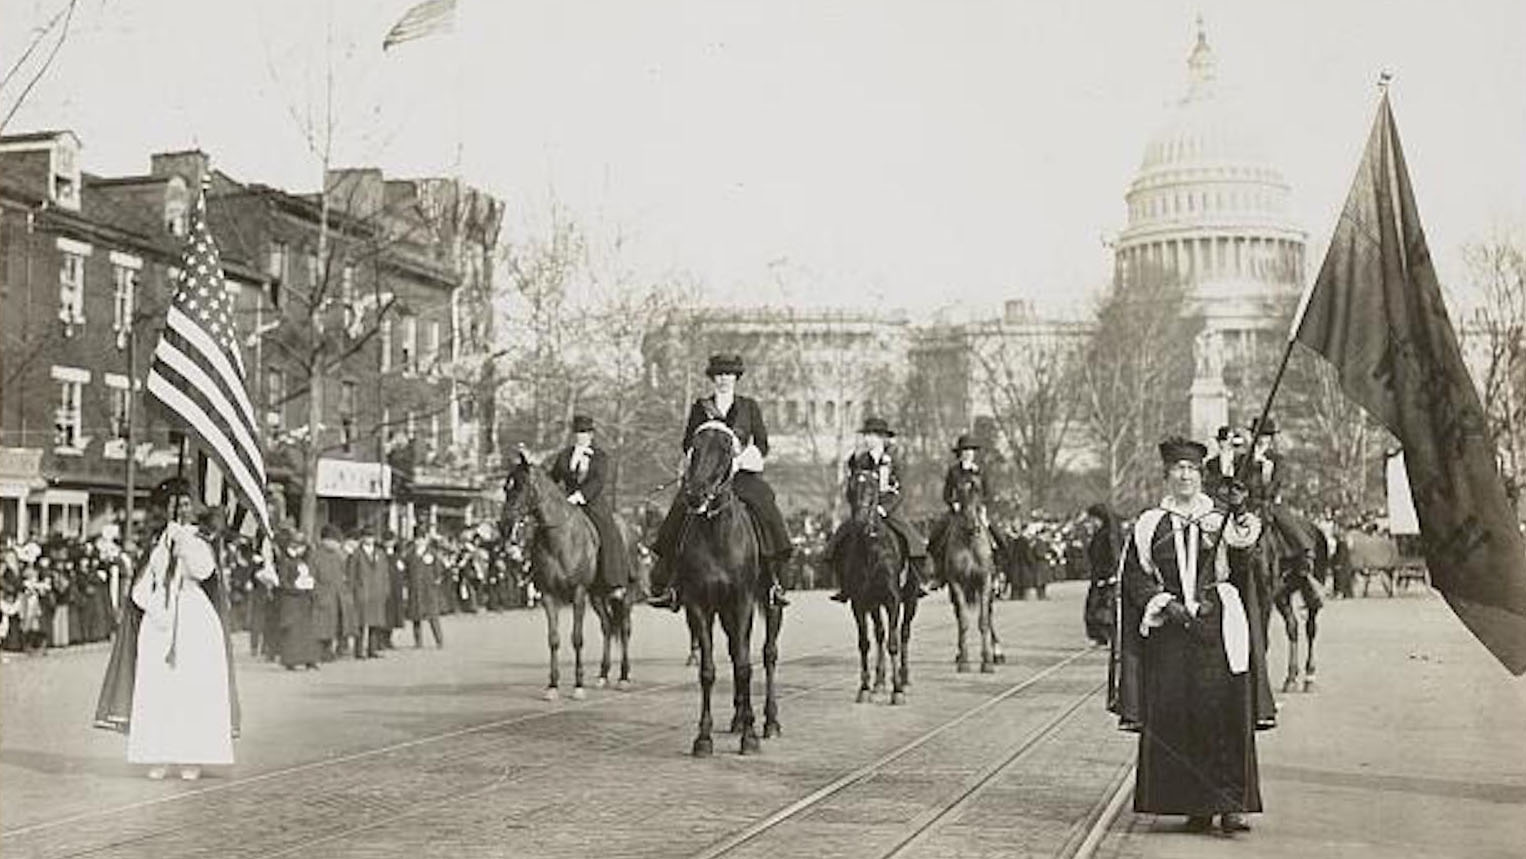 Image from Library of Congress of suffrage parade in 1913